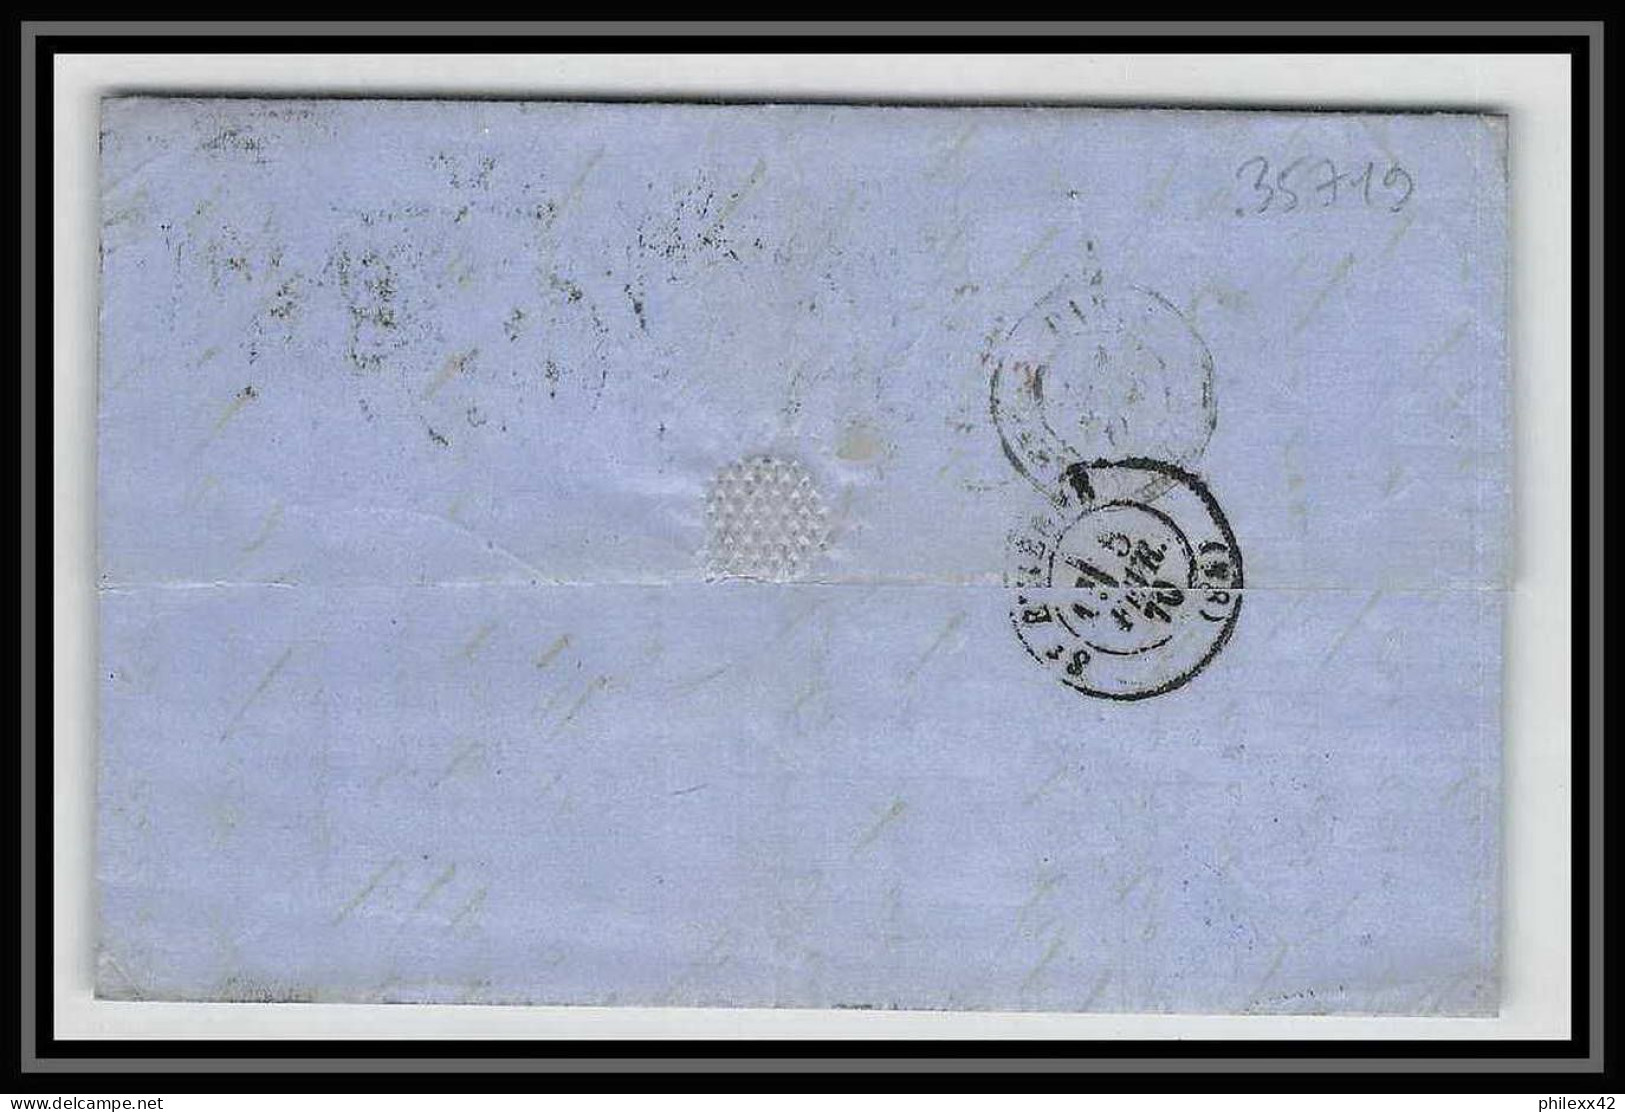 35719 N°32 Victoria 4p Red London St Etienne France 1870 Cachet 74 Lettre Cover Grande Bretagne England - Covers & Documents